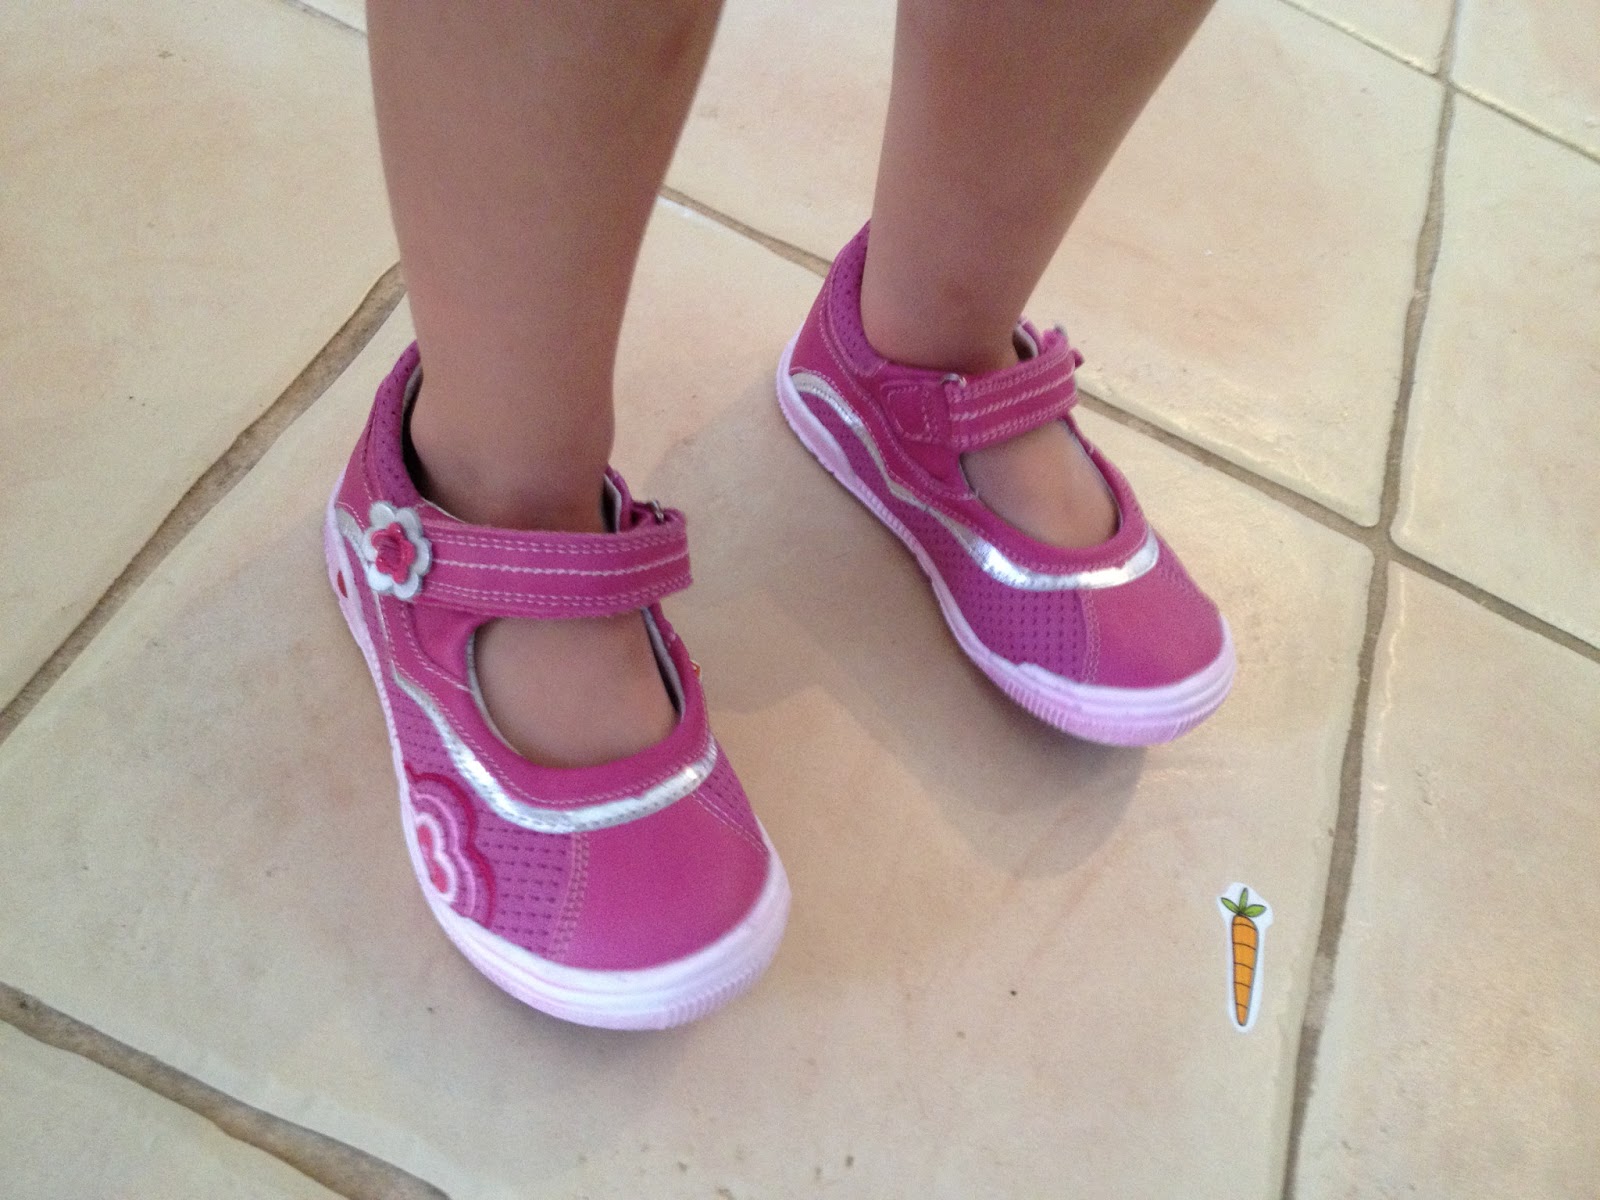 Check out the full rangeof great kids shoes at Betts Kids here